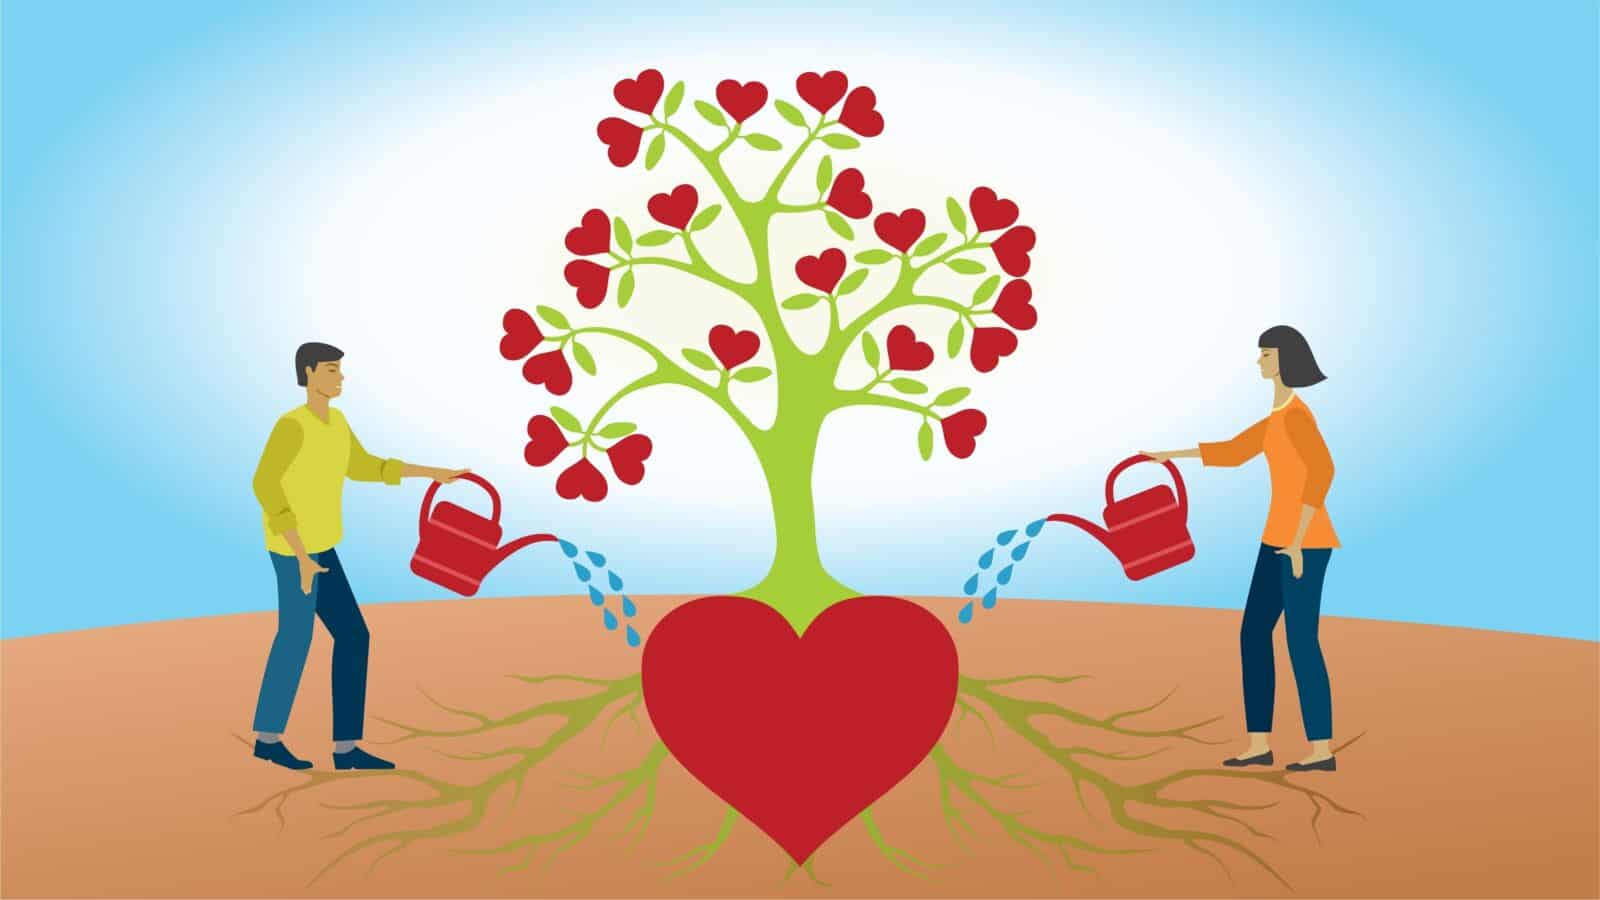 A couple waters a tree, signifying nurturing love.